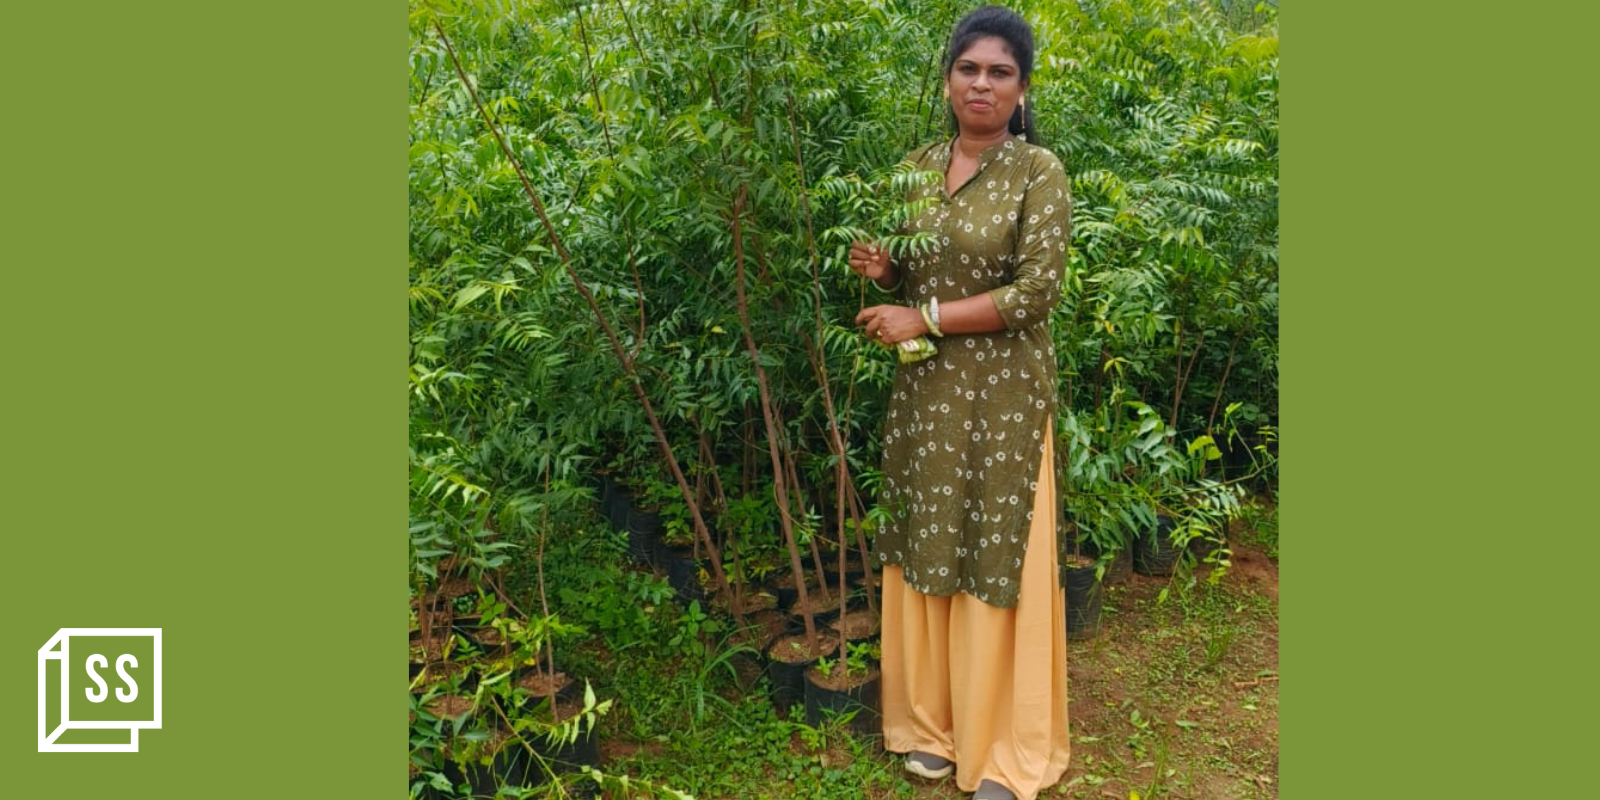 She sold her family’s car to start a farmer-producer company 